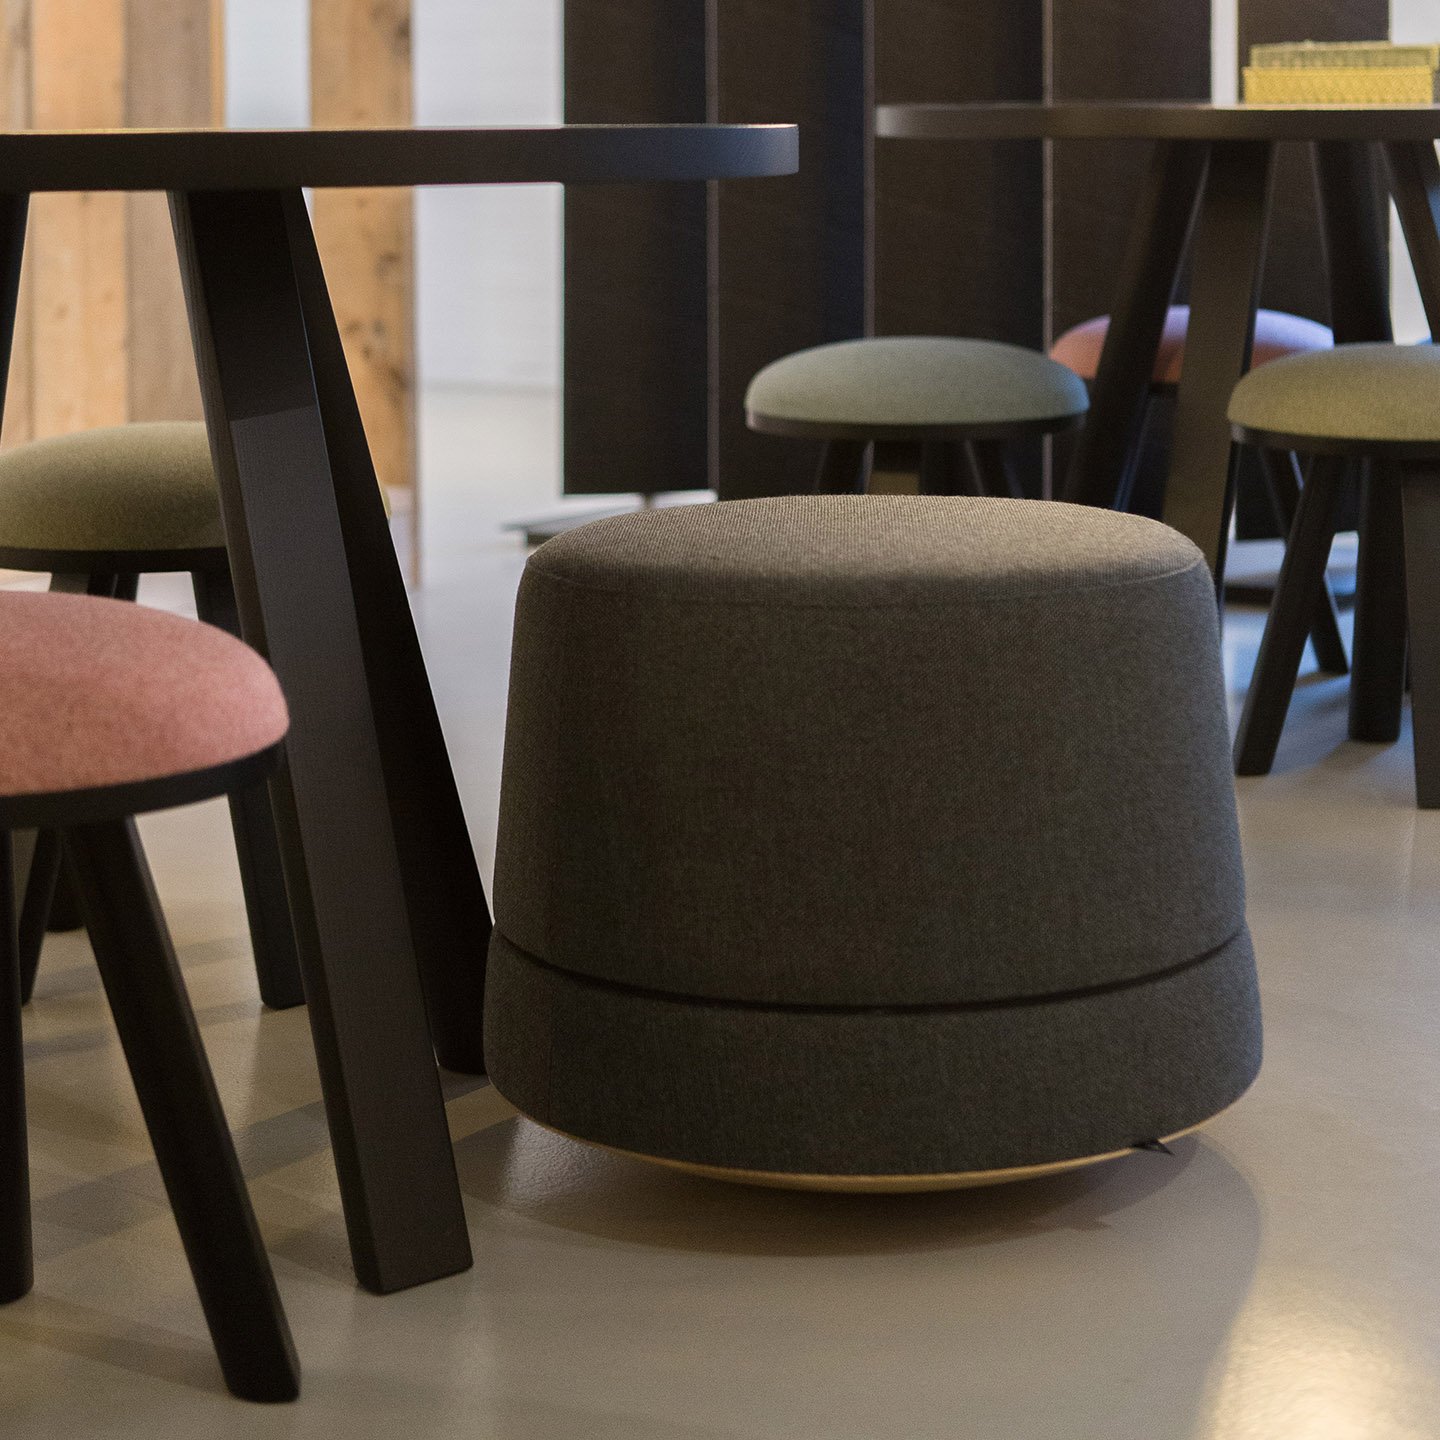 Haworth Buzzibalance poufs with Buzzimilk stools in multiple colors in a cafe